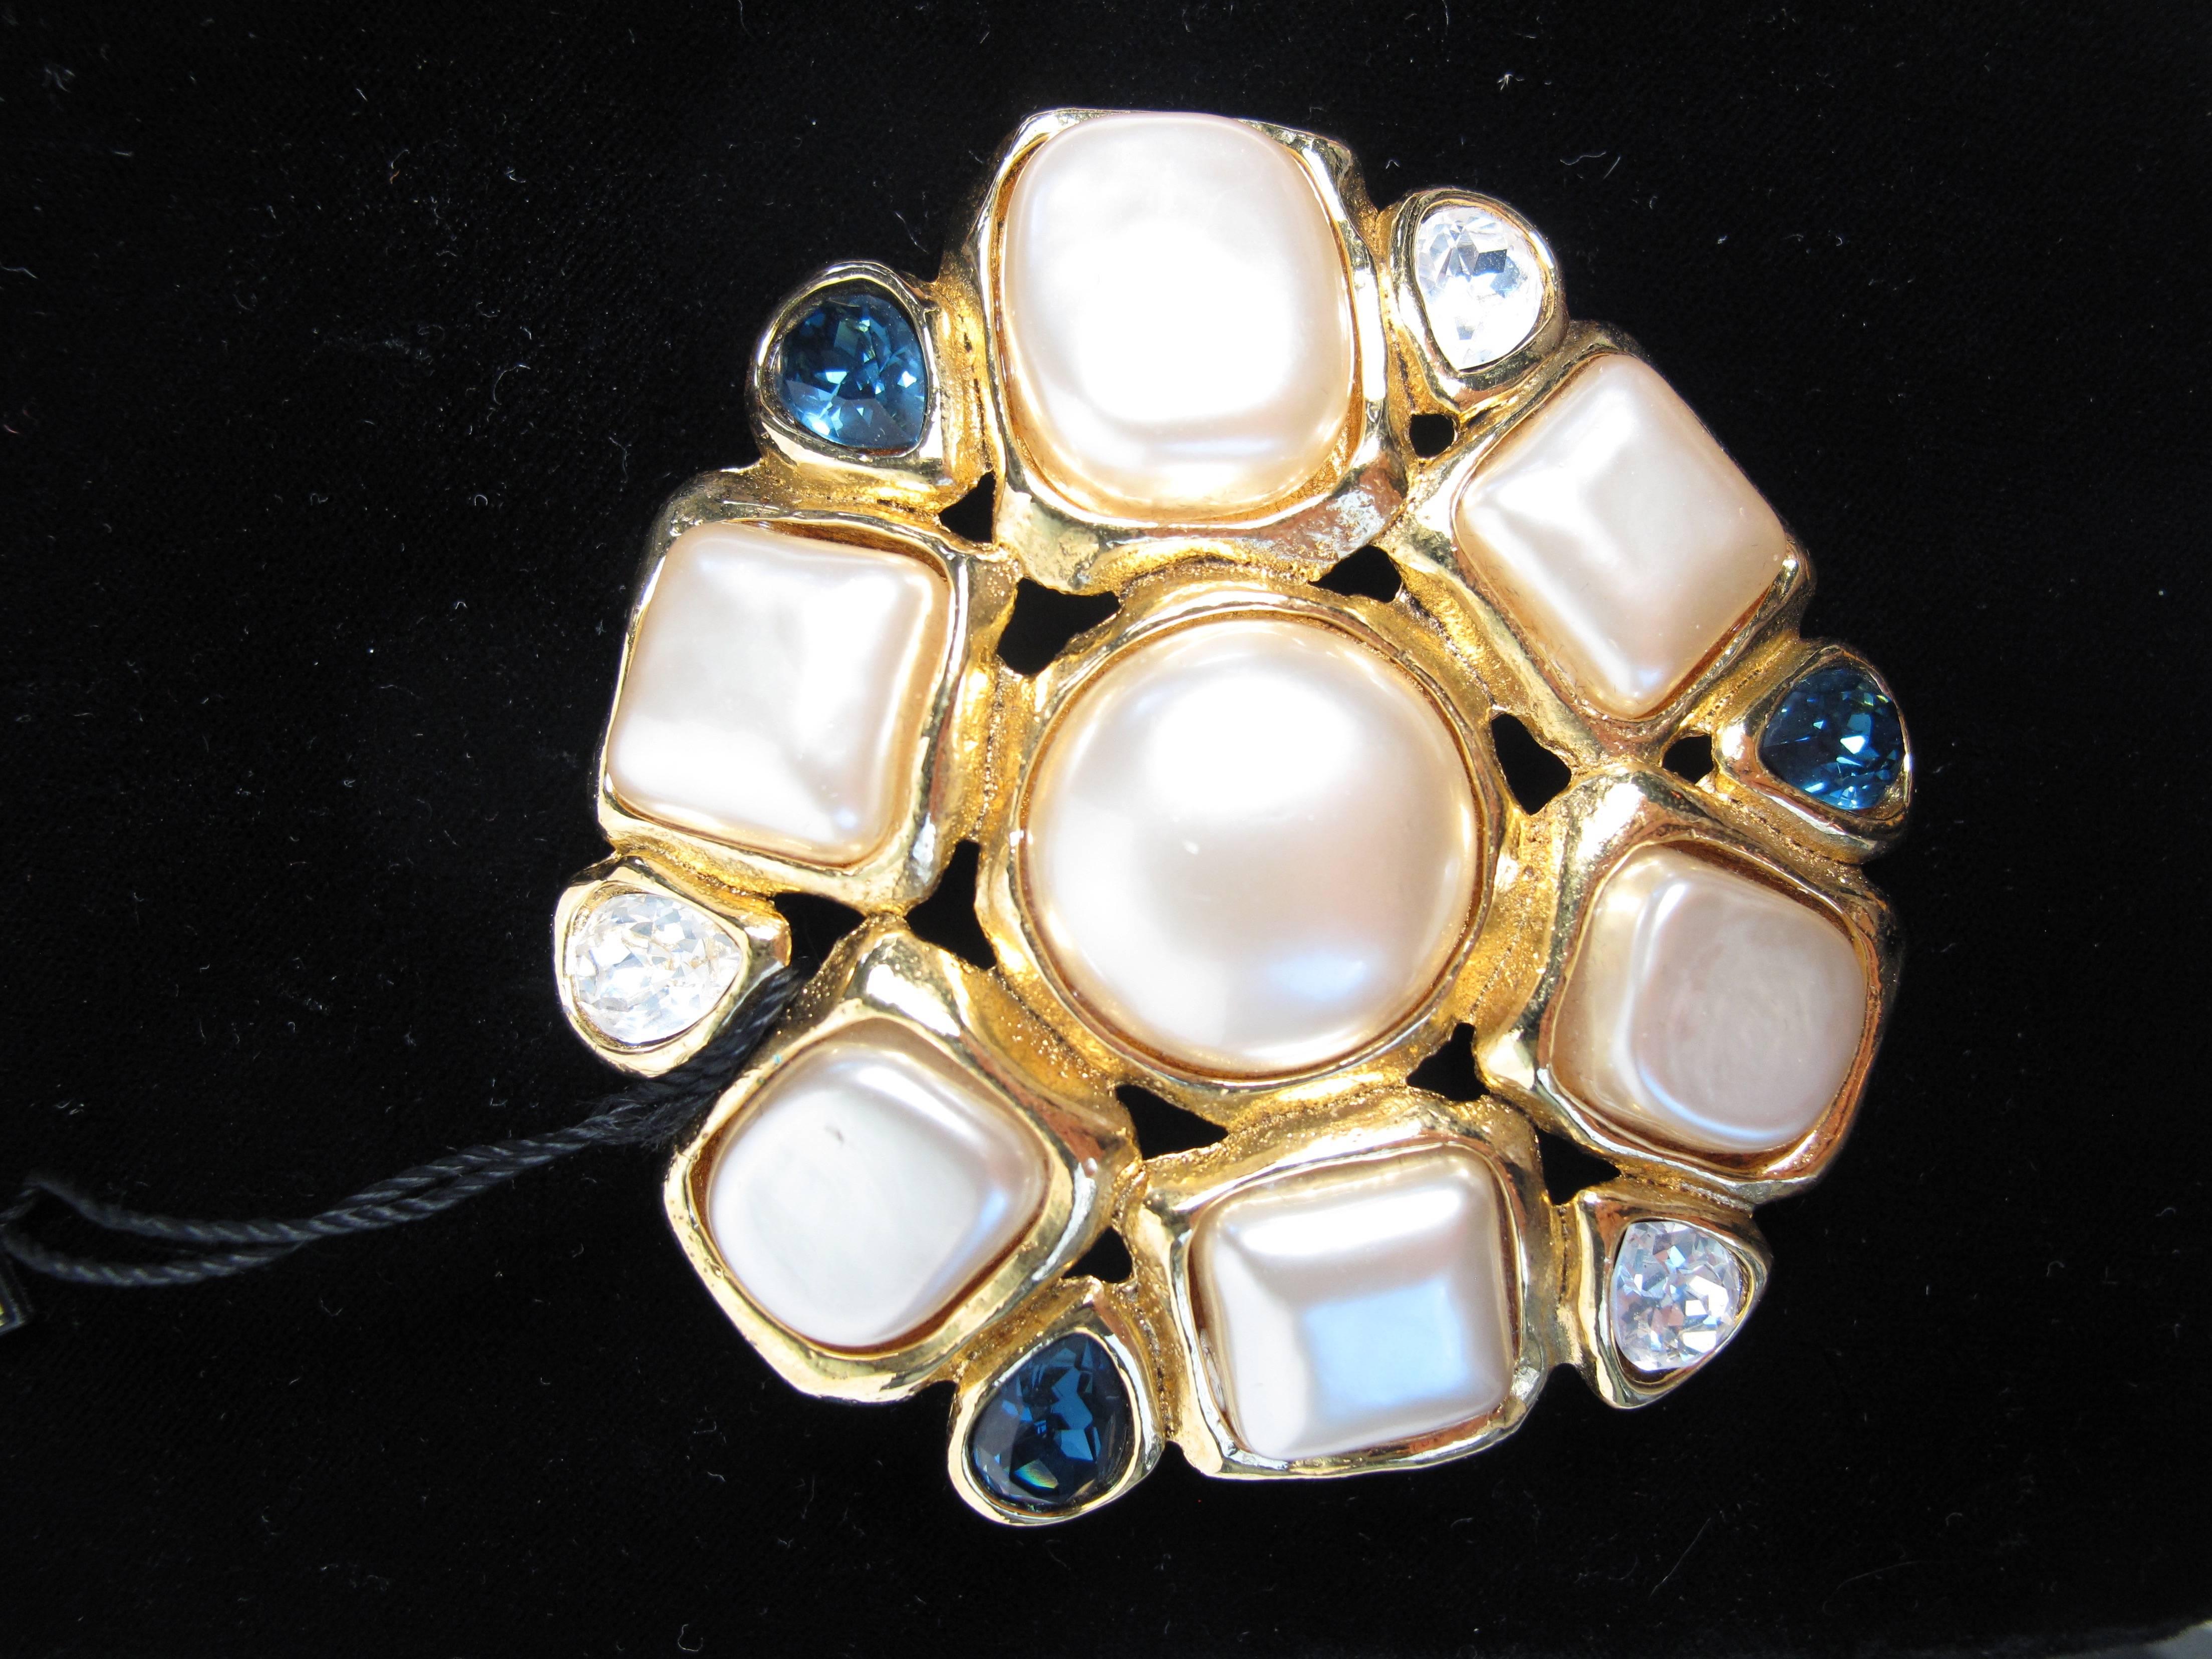 1991 New in Box CHANEL faux pearl and gripoix large brooch.  Season 26. Condition: very good, small chip on one faux pearl.
We accept returns for refund, please see our terms. We offer free ground shipping within the US. Please let us know if you